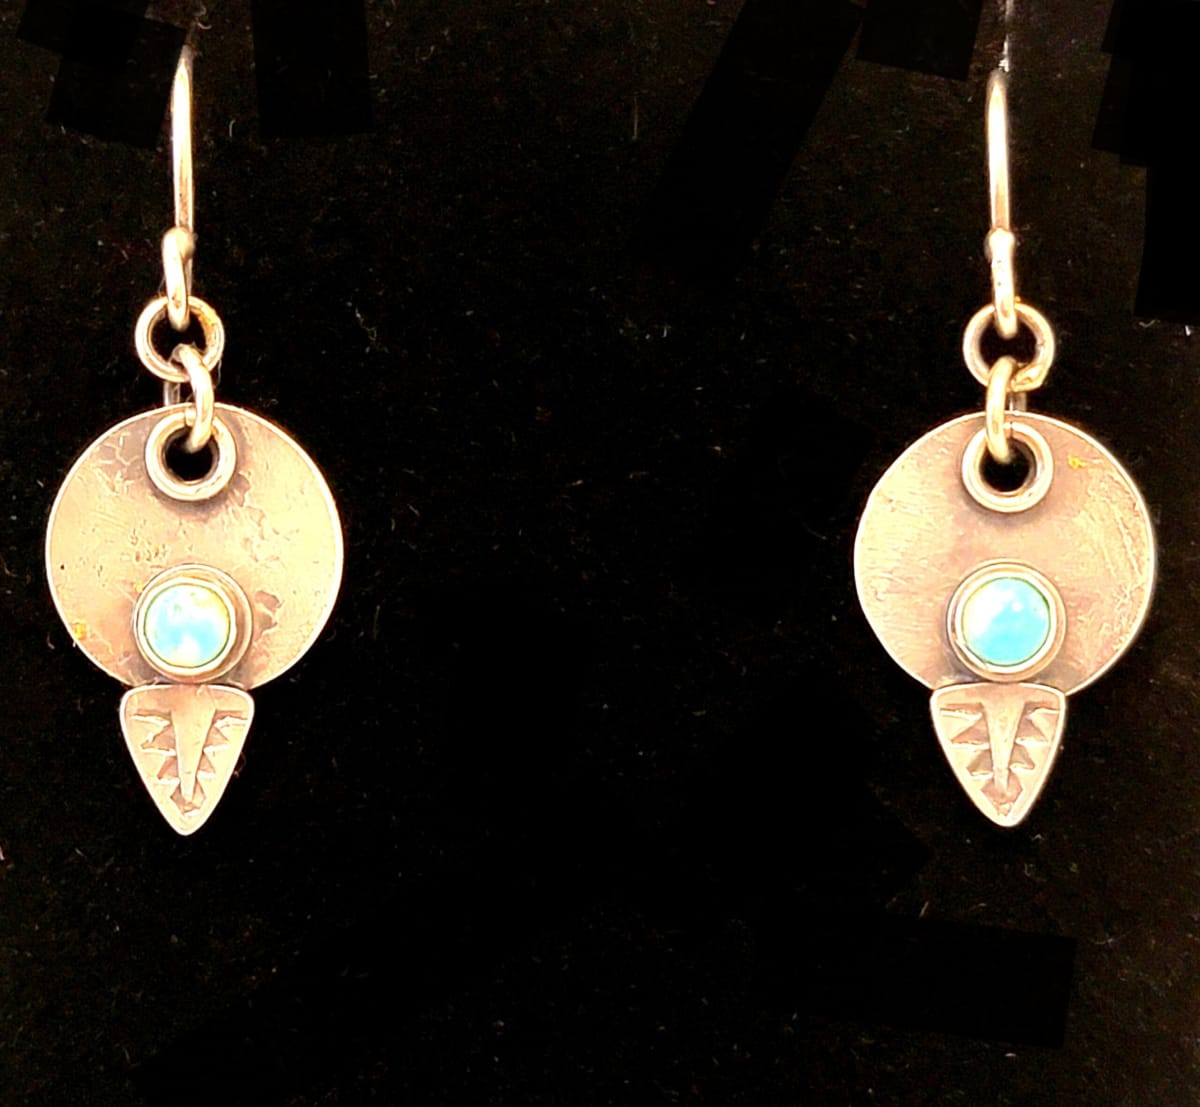 "EVE Earrings" - Rustic Hand Stamped Triangle Accent French Wire Earrings with Dainty Mona Lisa Turquoise by Shasta Brooks  Image: All Art © Shasta Brooks Studio LLC